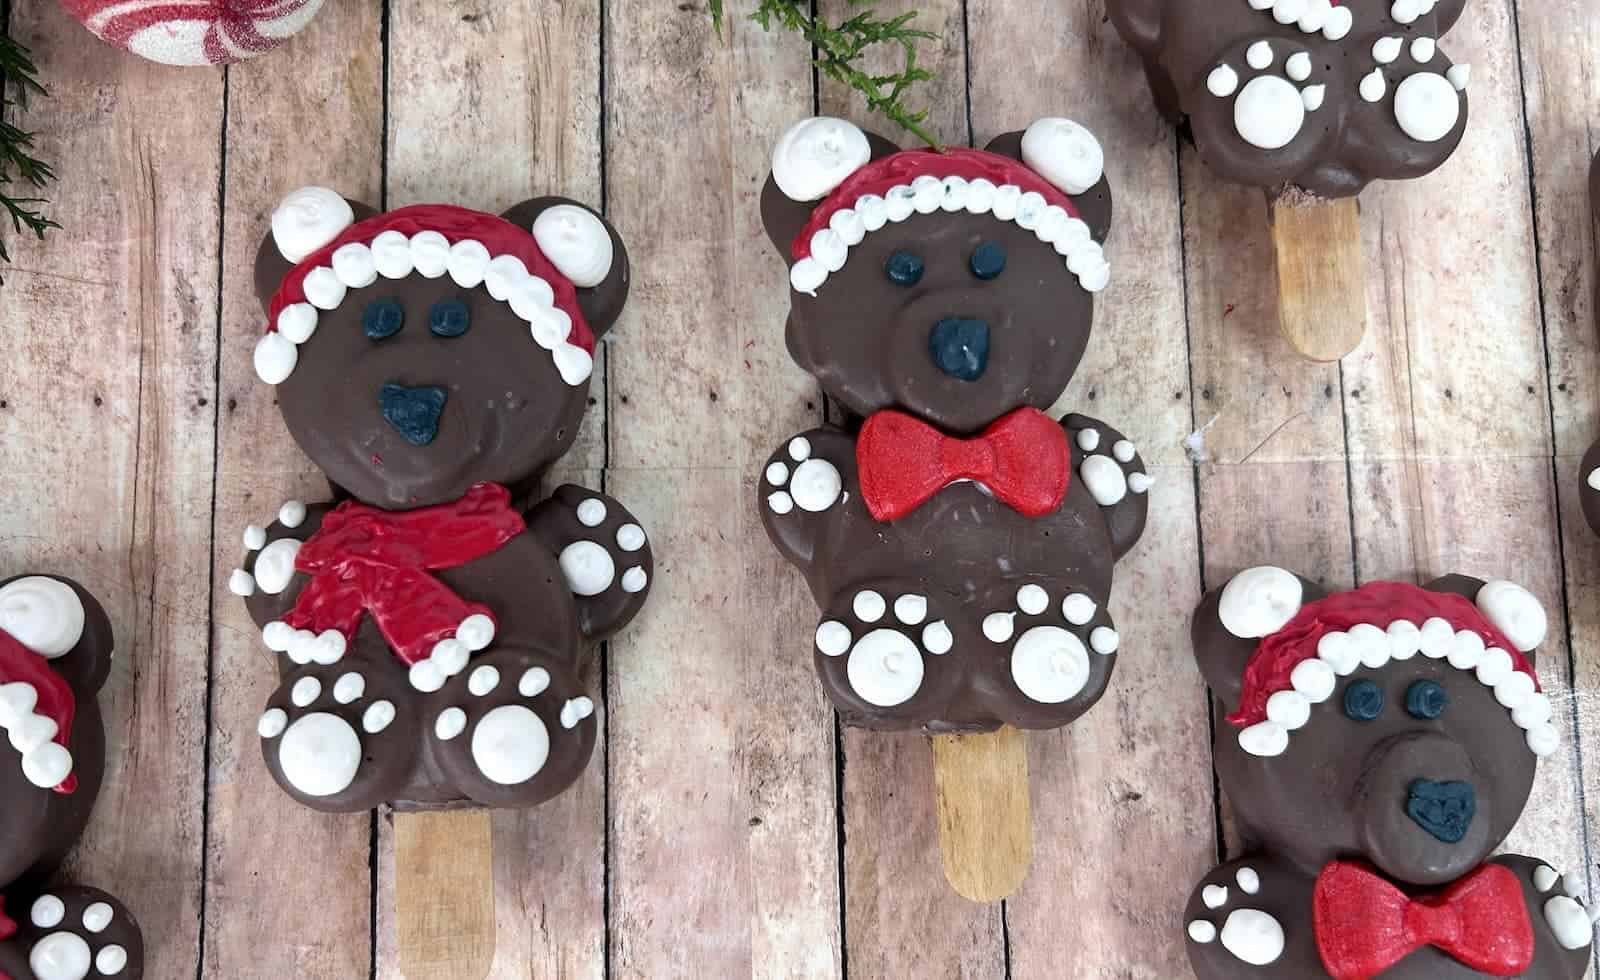 Chocolate-covered Santa teddy bear Oreo pops on wooden background.